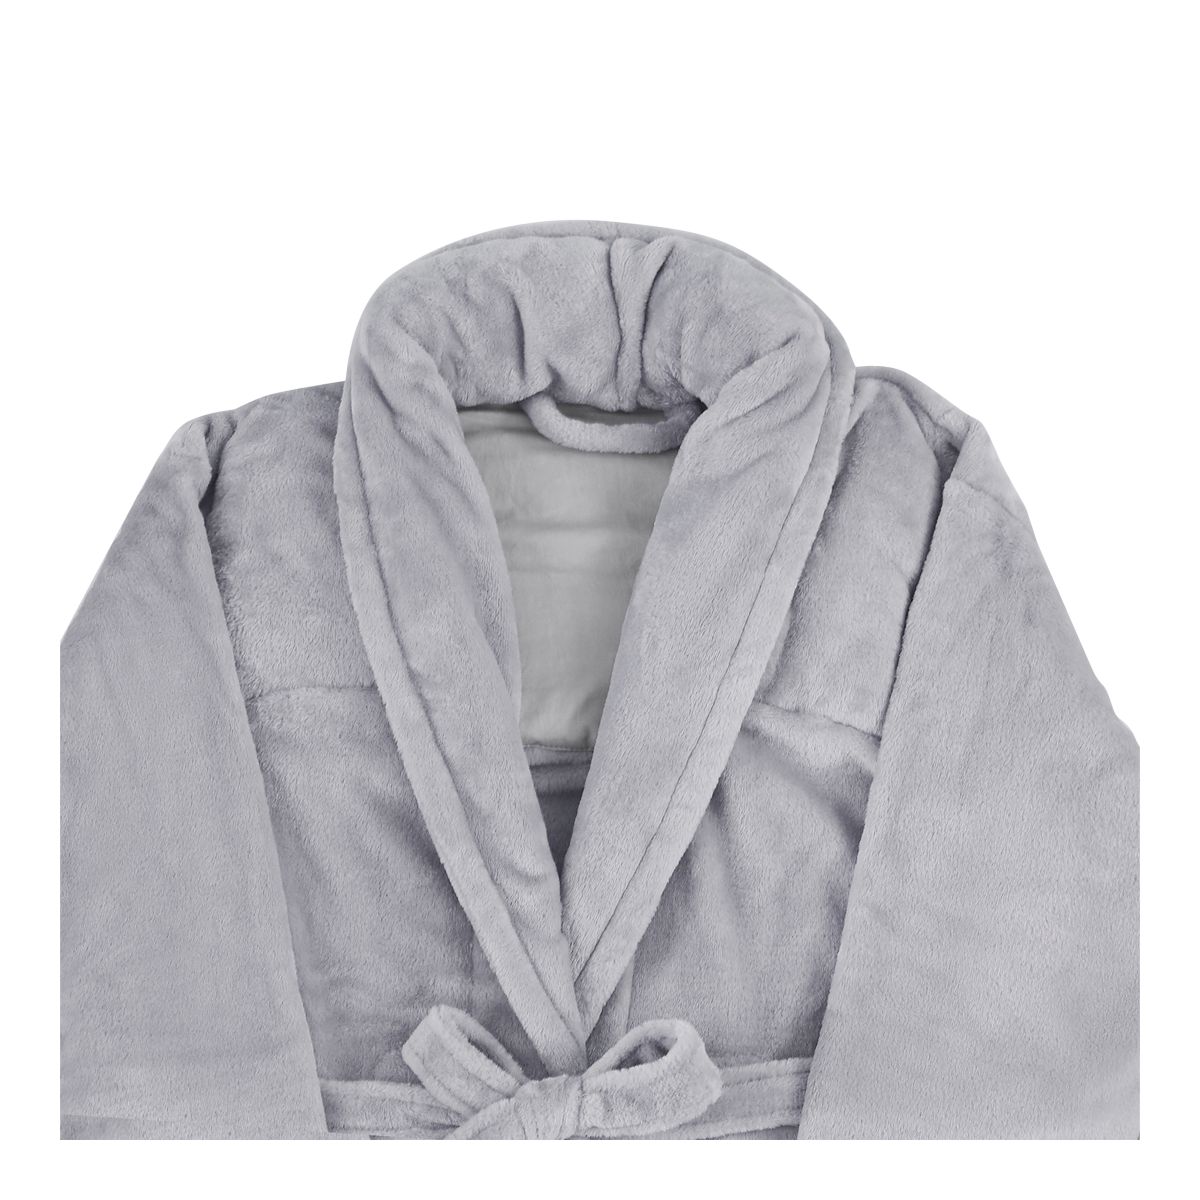 Pur Serenity 5 lb Weighted Robe